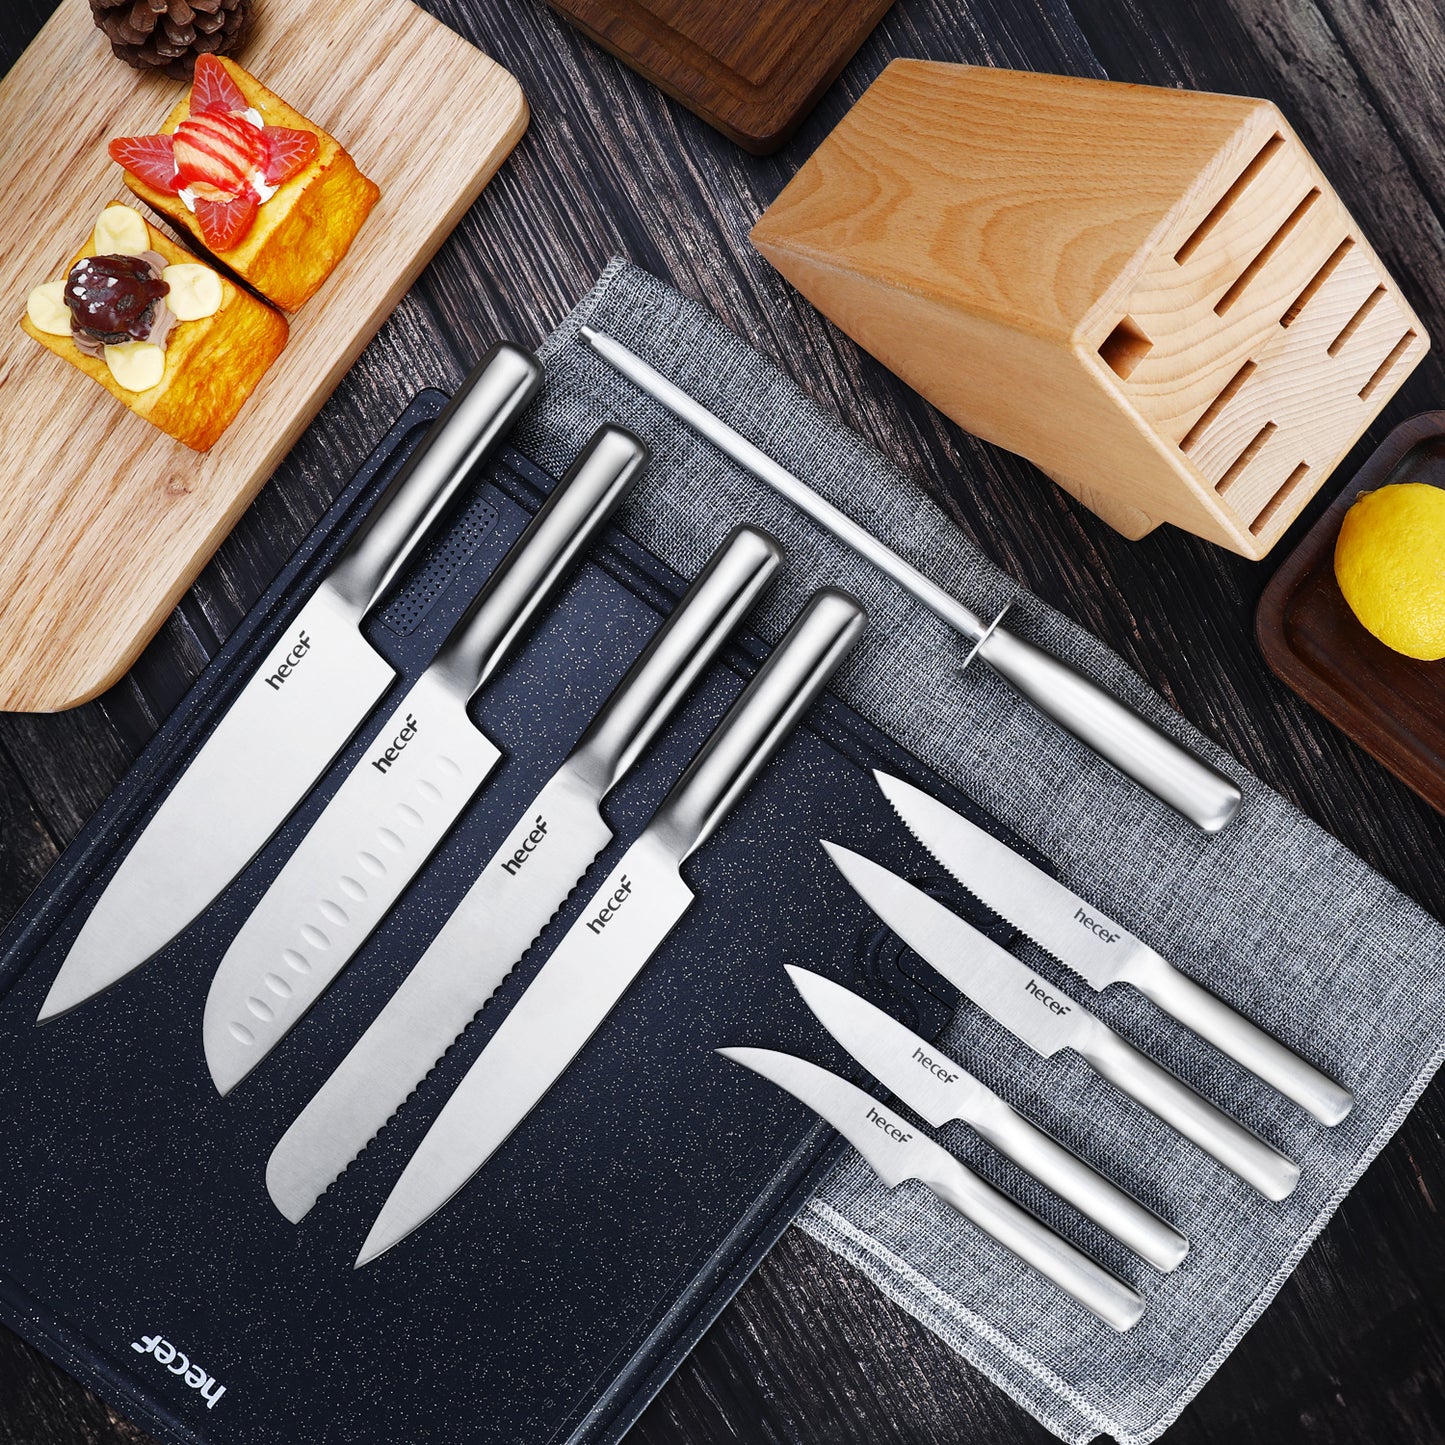  hecef Kitchen Knife Block Set, 12 Pieces Knife Set with Wooden  Block & Steak Knives Set, Lightweight and Strong High Carbon Stainless  Steel Cutlery Set, Extended Handle Design: Home & Kitchen